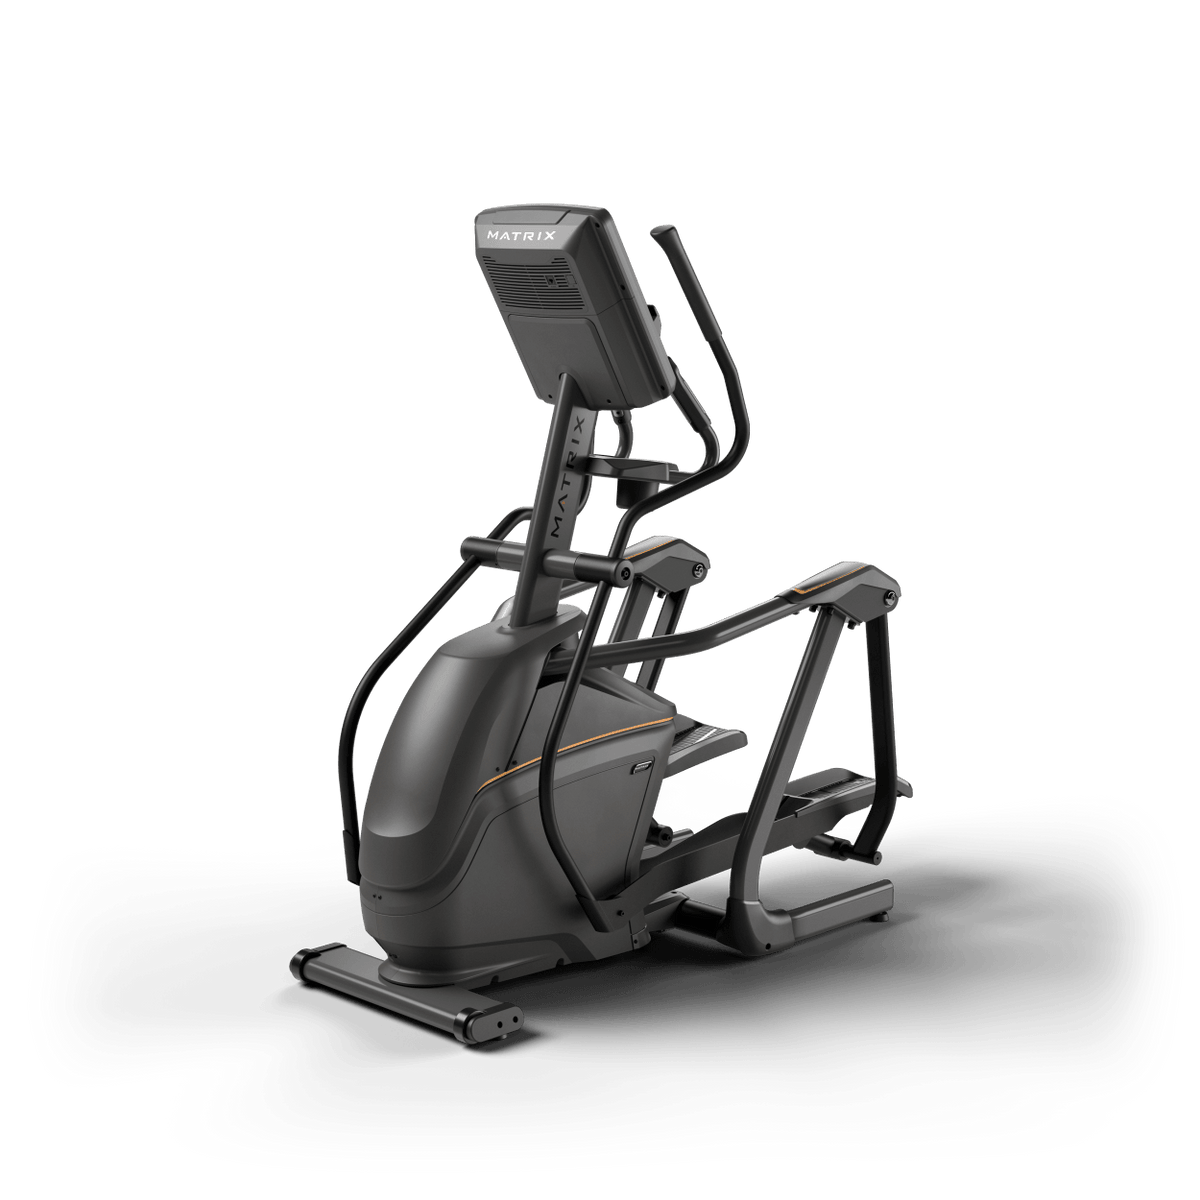 Matrix Lifestyle Elliptical with Premium LED Console rear view | Fitness Experience